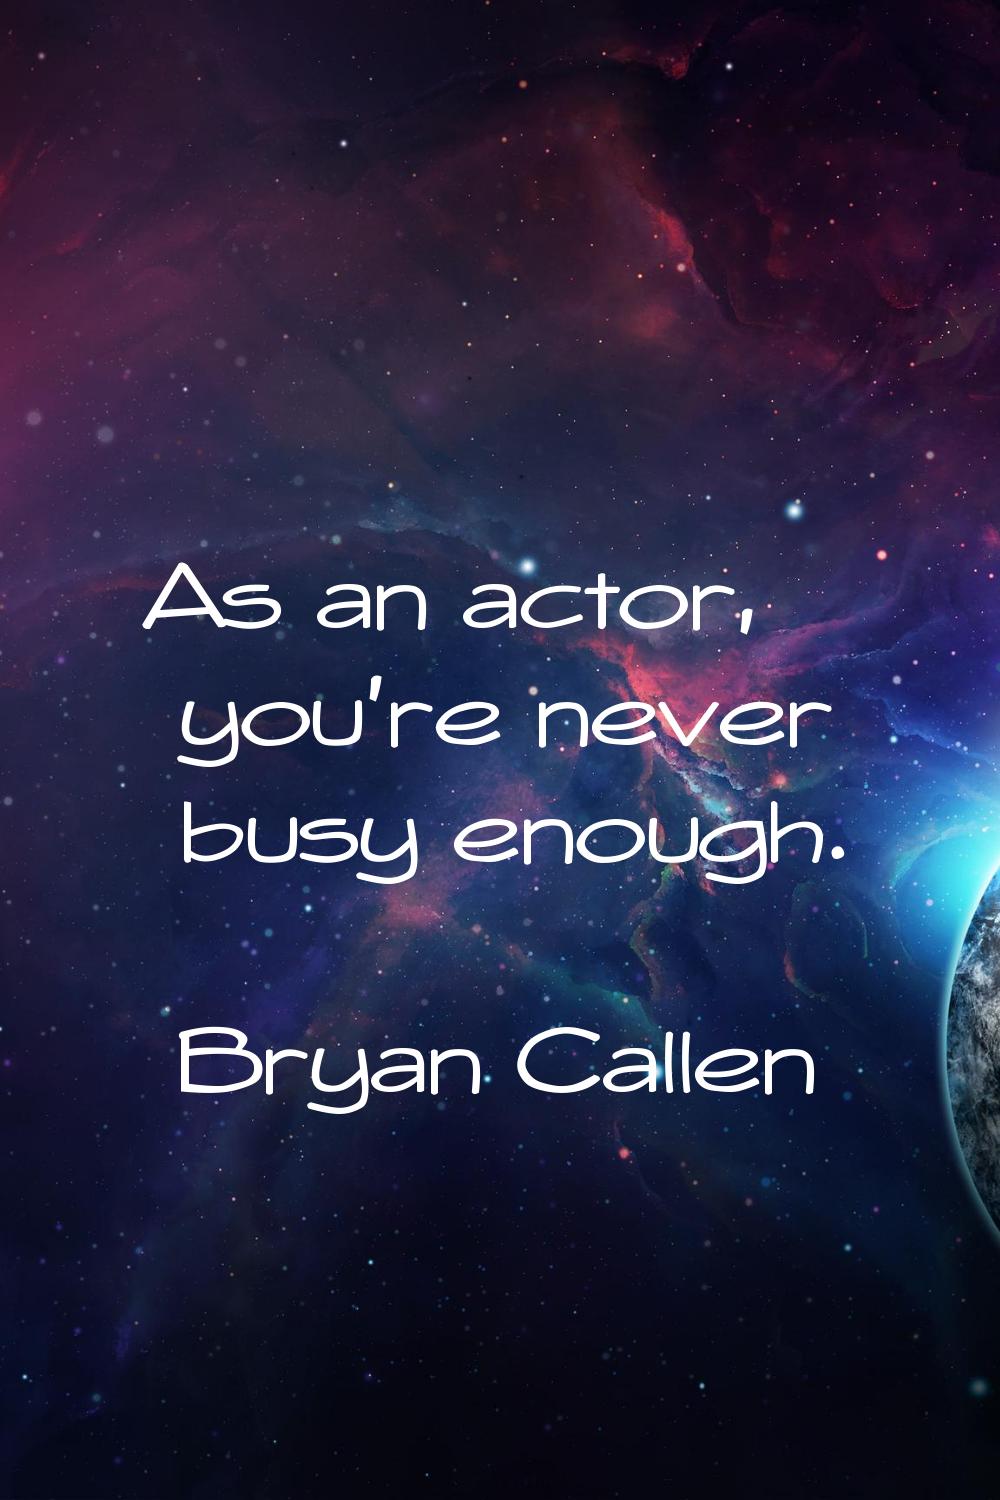 As an actor, you're never busy enough.